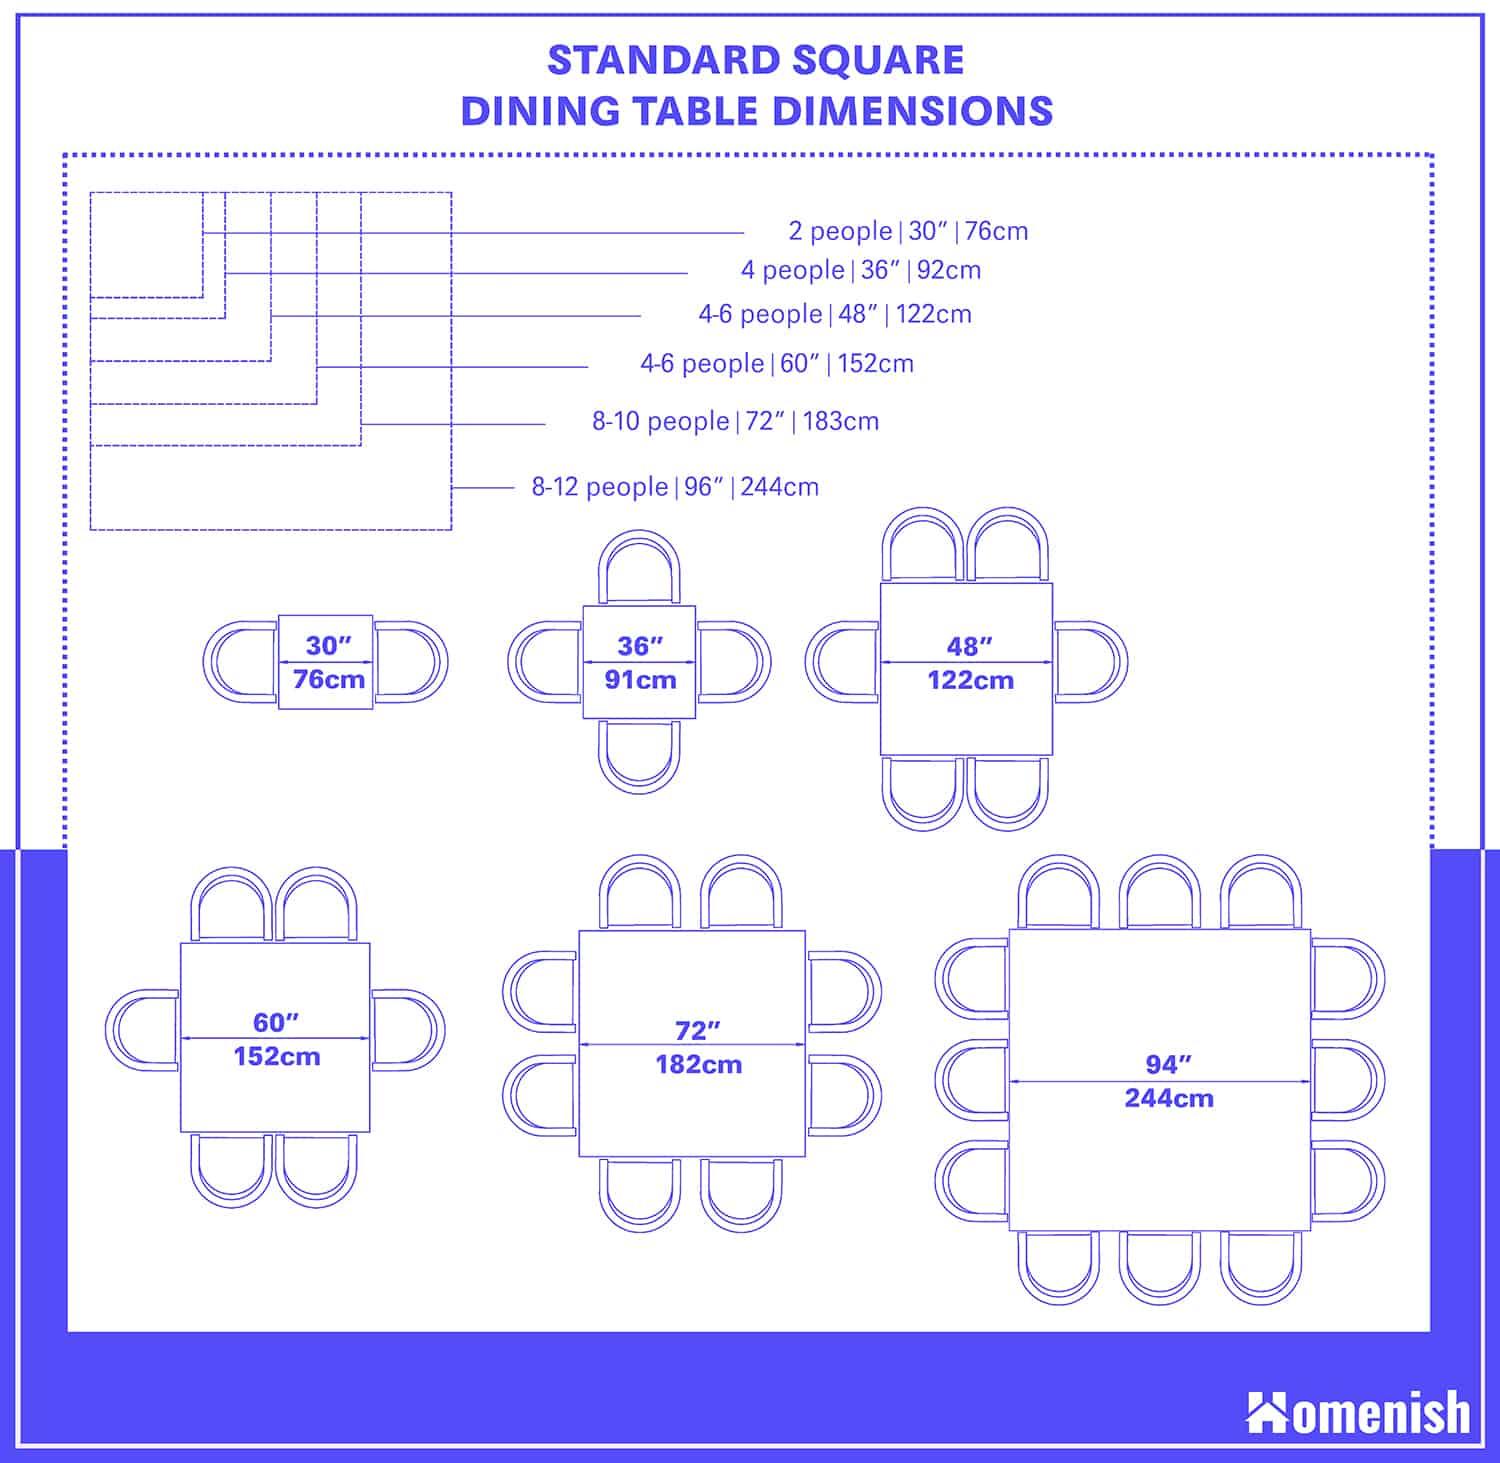 Standard Dining Table Dimensions & Sizes with 20 Detailed Diagrams ...